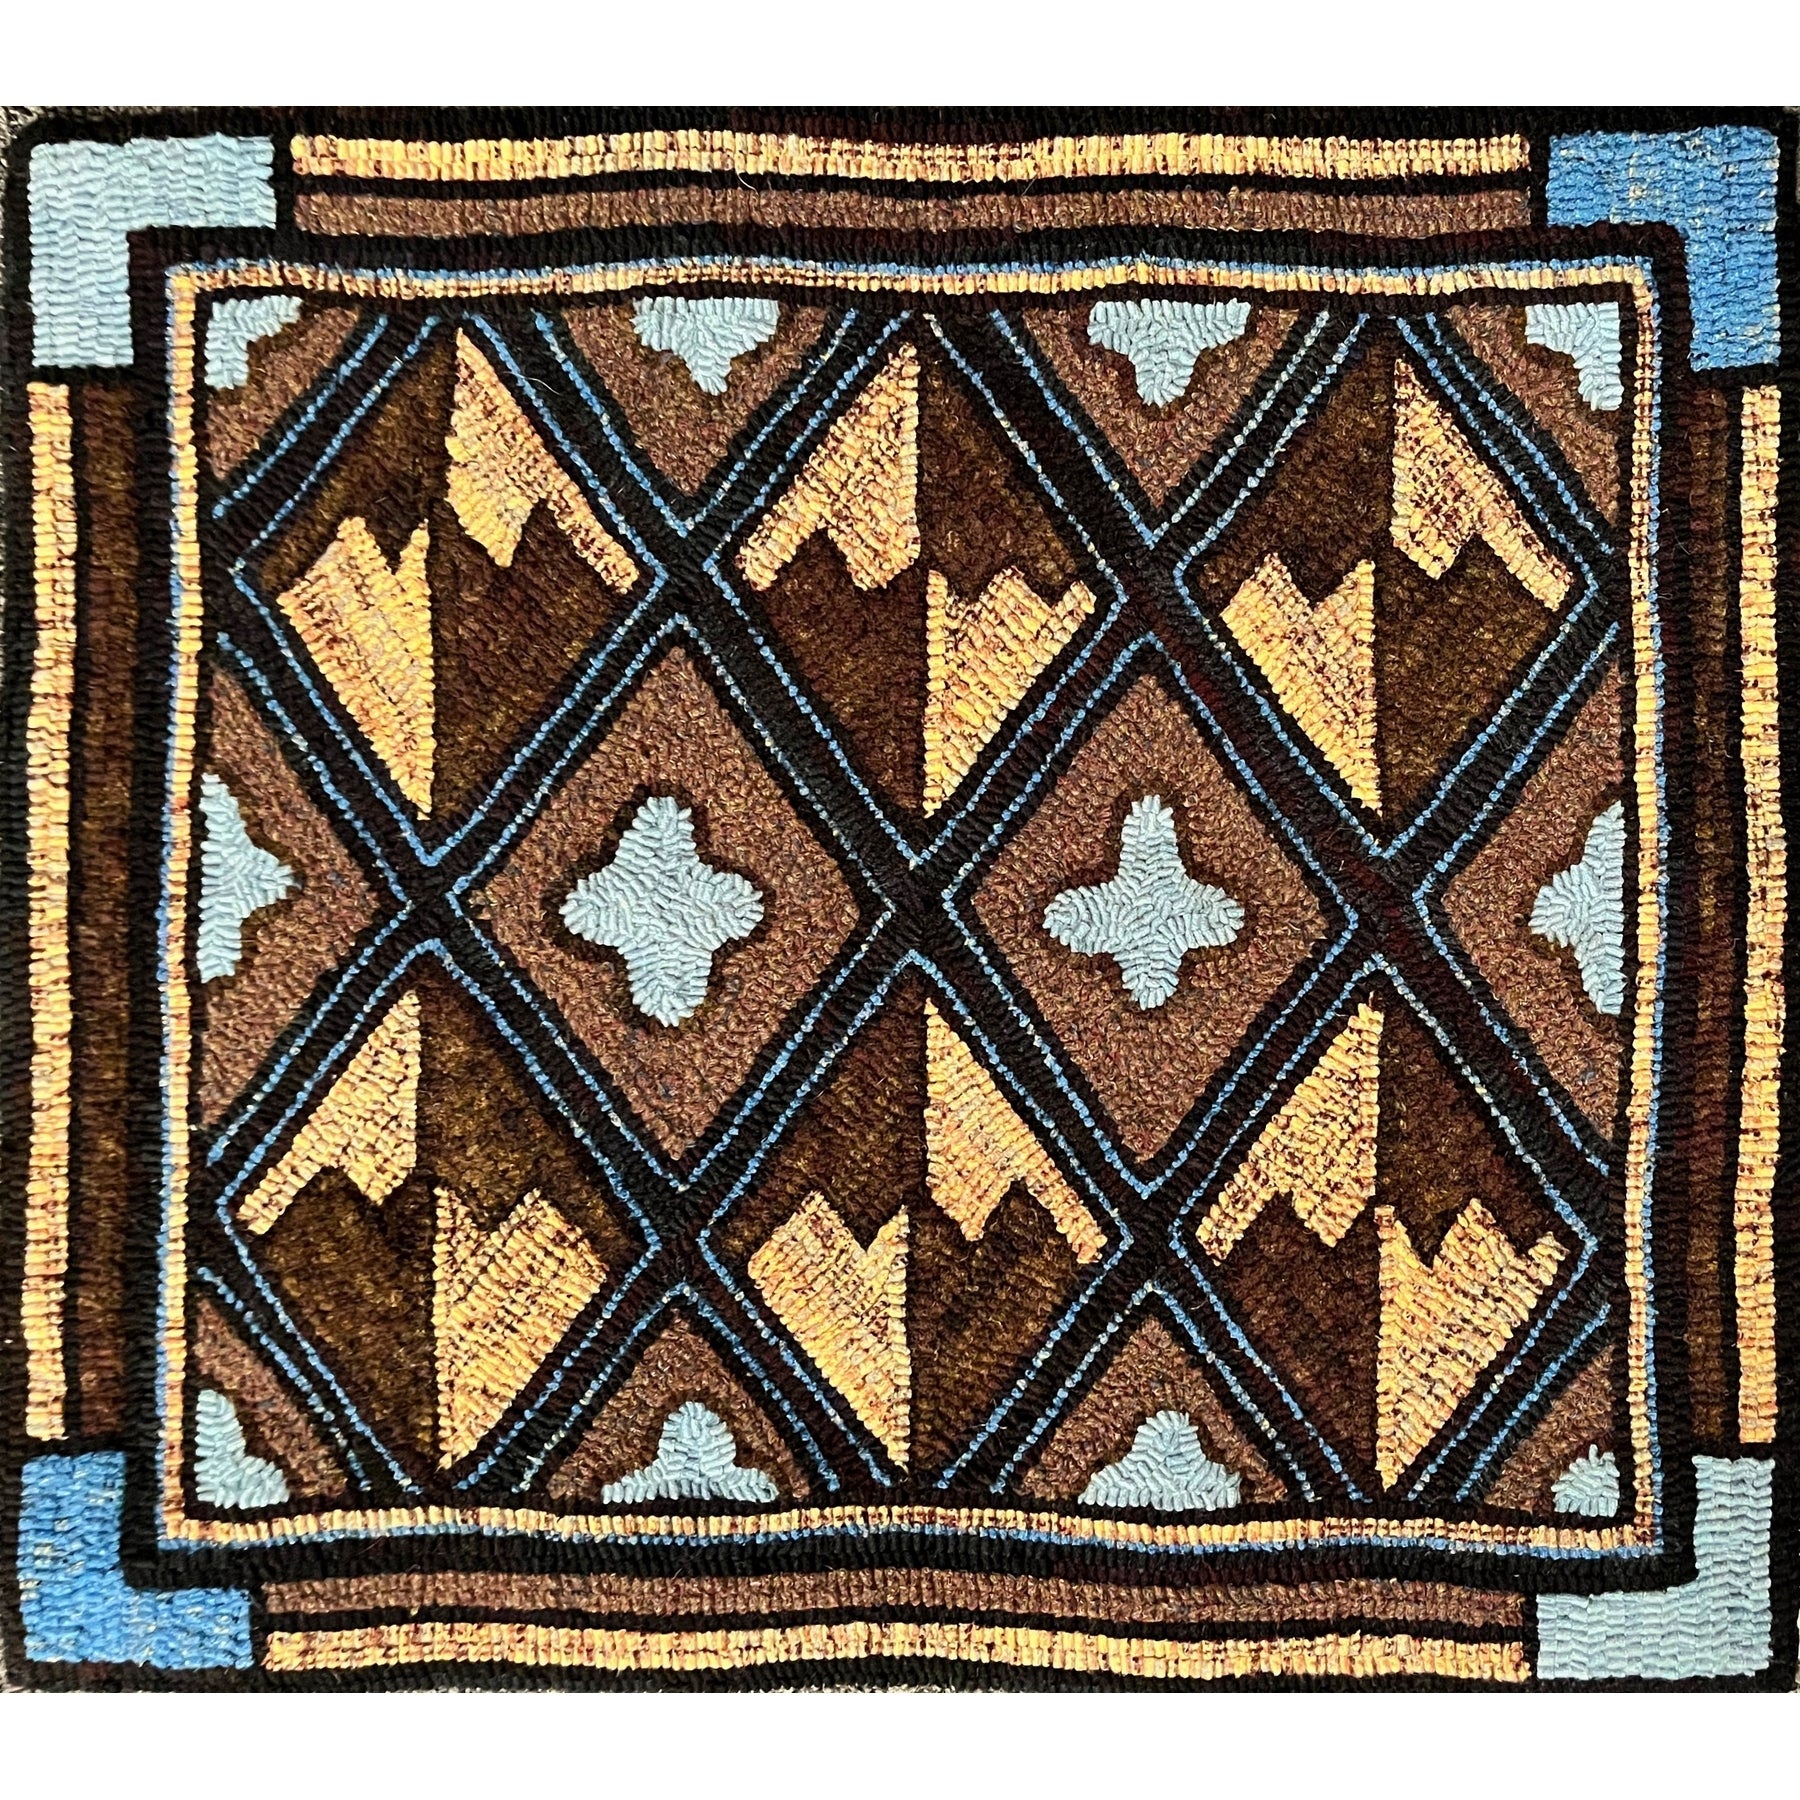 Criss Cross, rug hooked by Mary McGrath